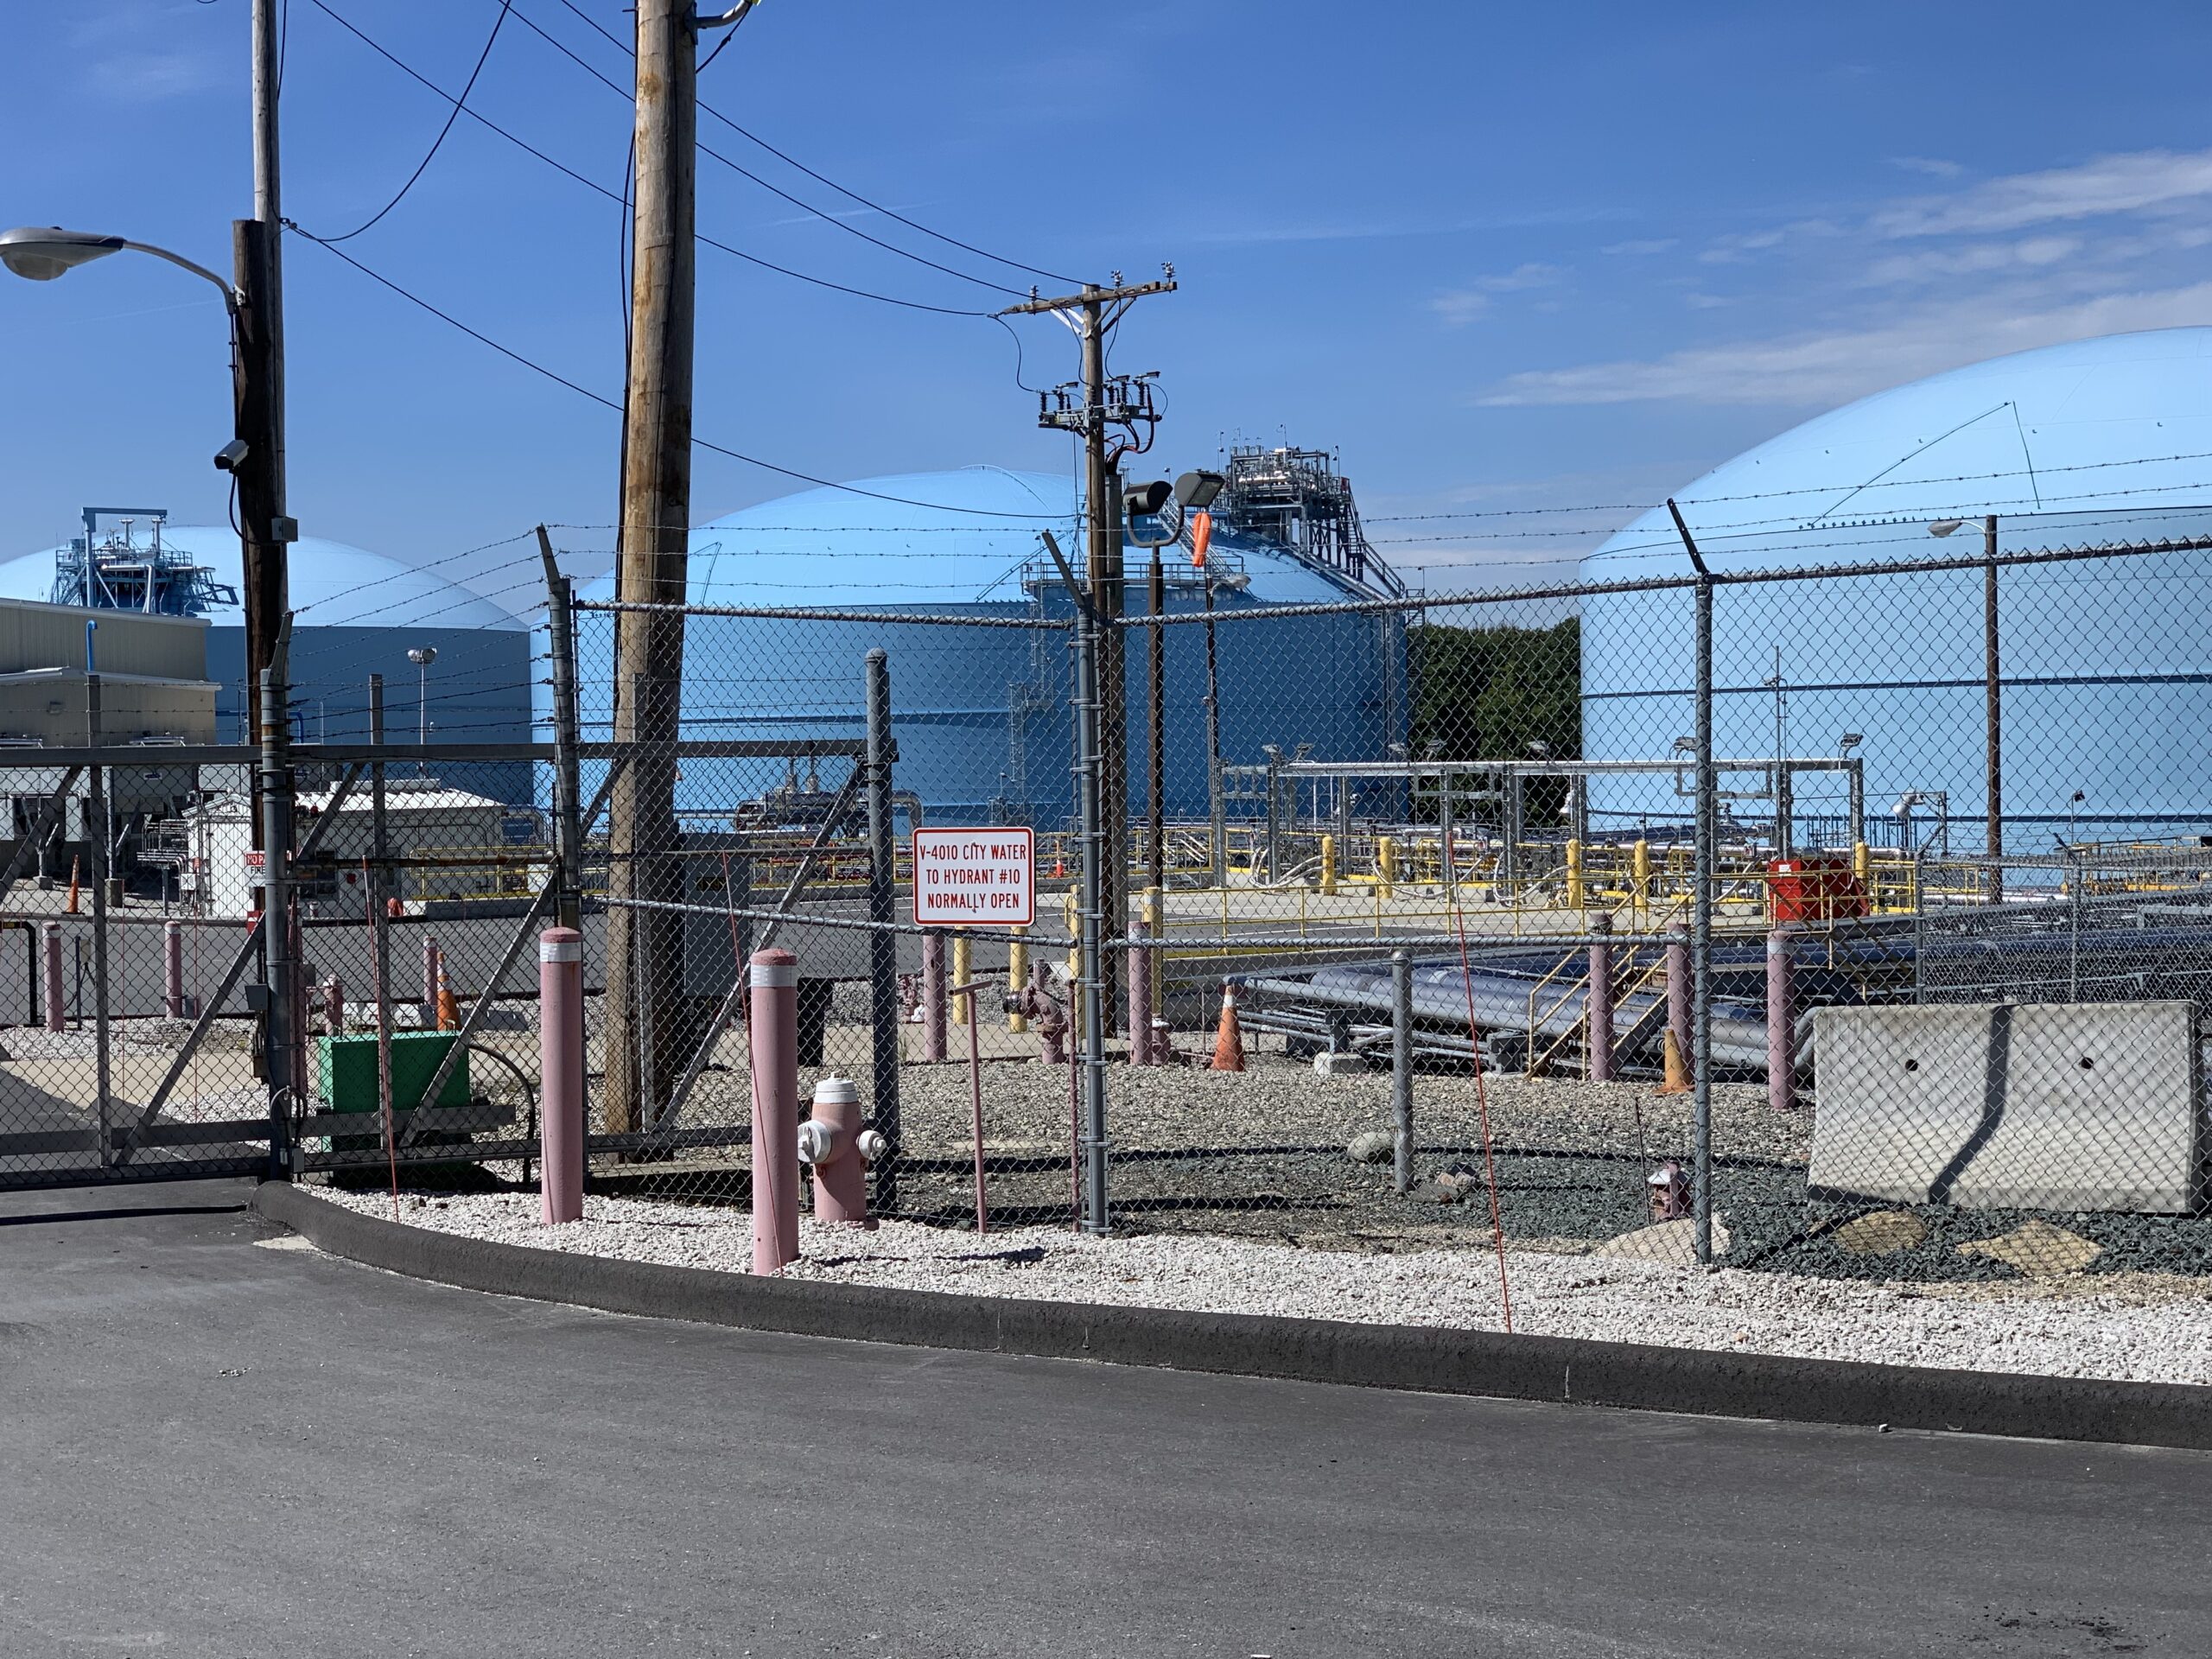 Town manager releases information on interactions with LNG facility